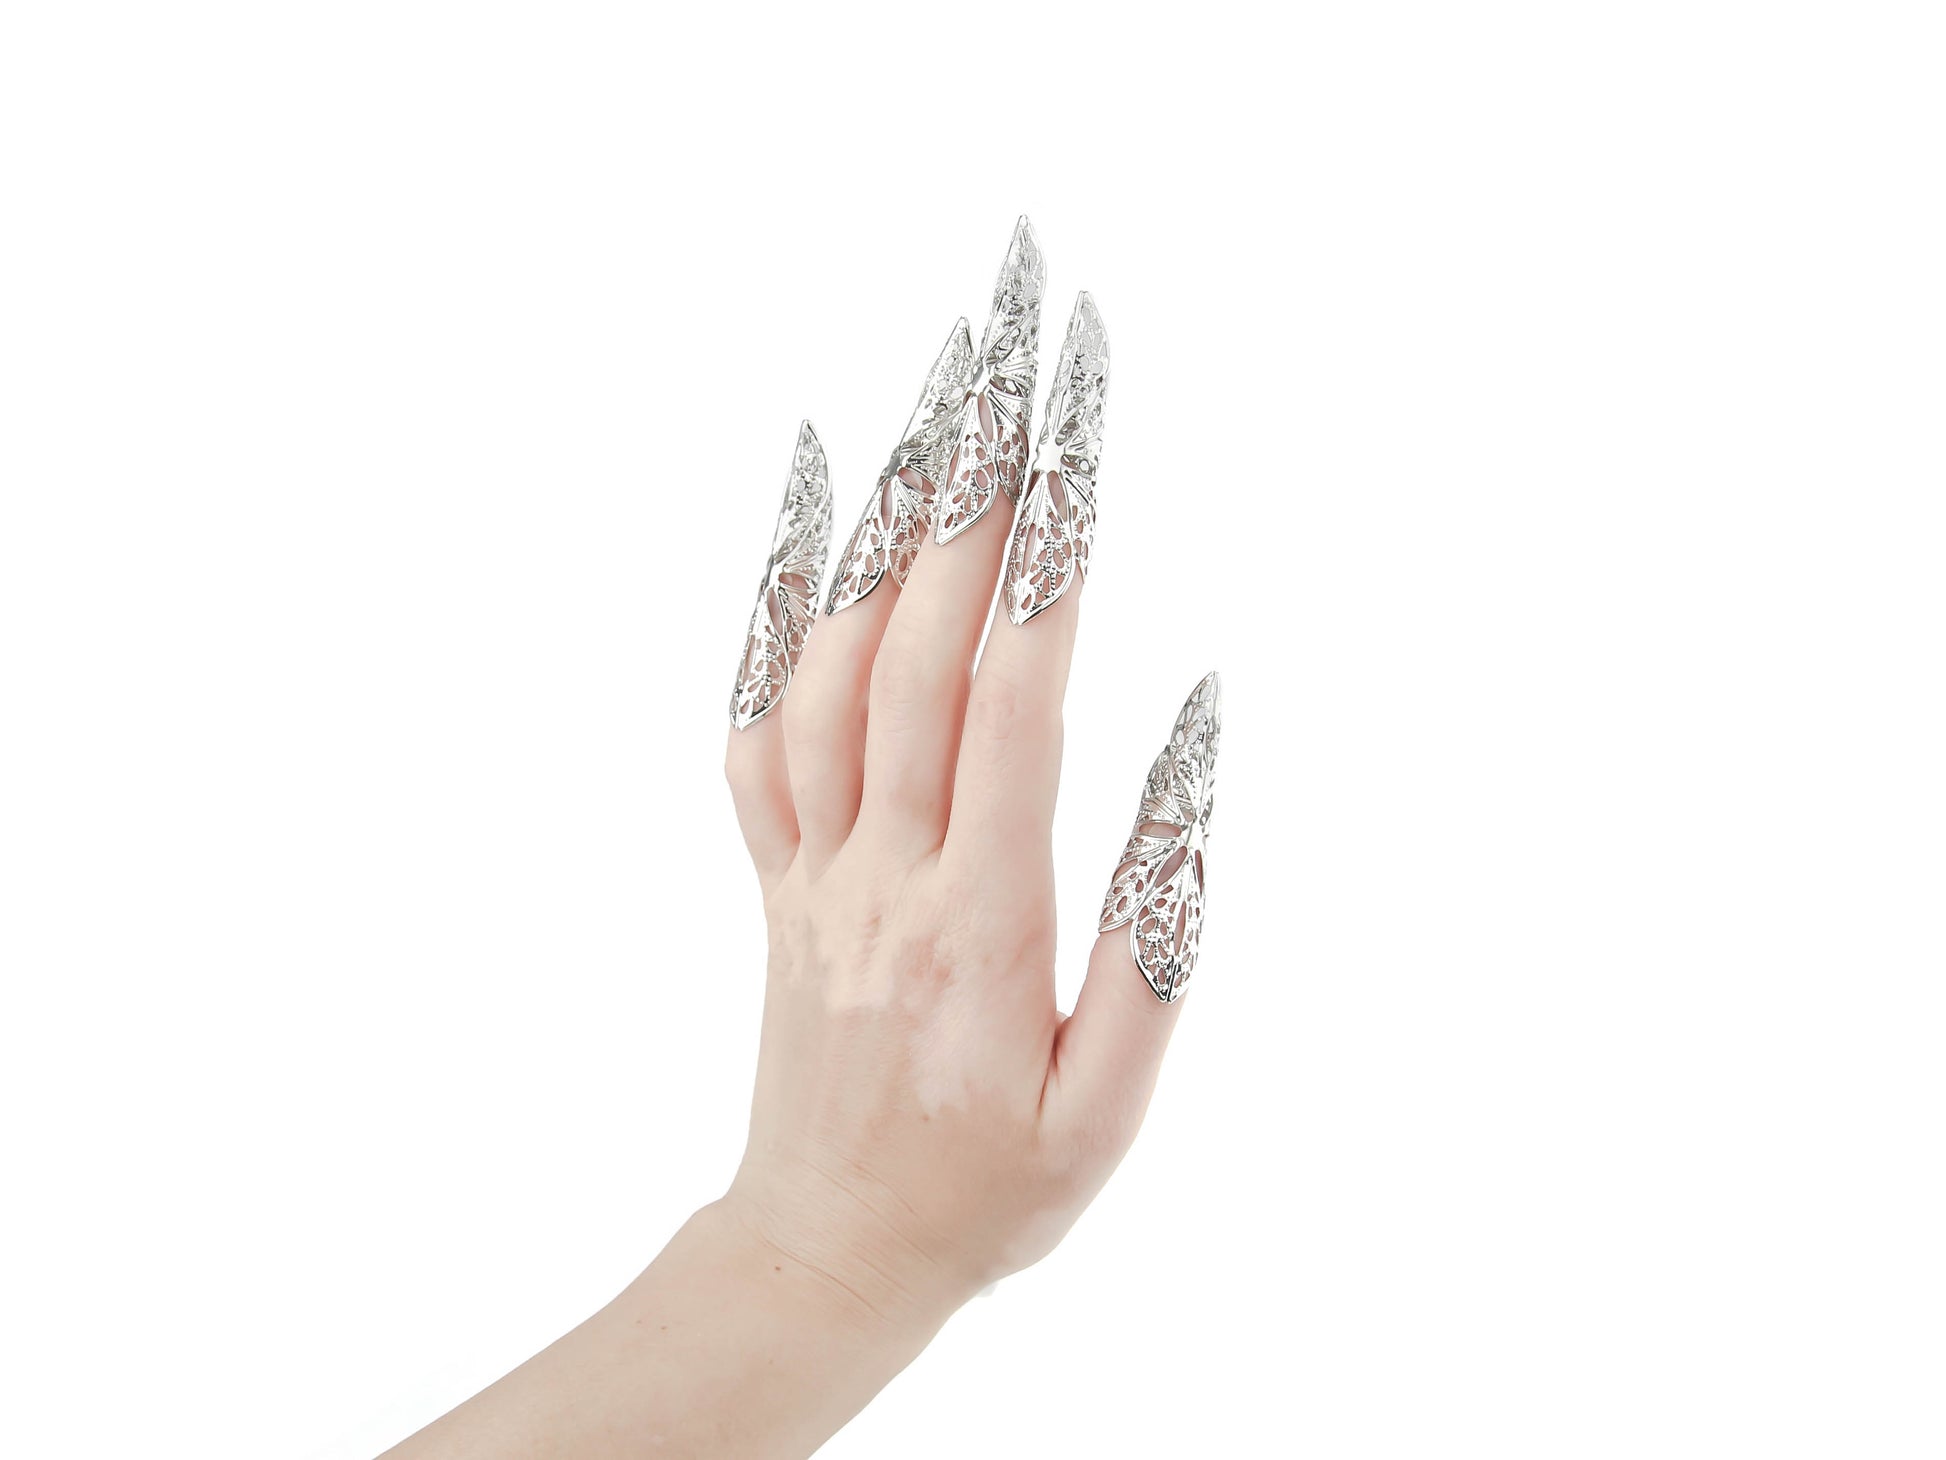 An elegant hand showcases Myril Jewels' long nail claws, reflecting a neo-gothic charm perfect for Halloween, witchcore, or everyday alternative wear. These bold, silver claws capture the essence of dark avant-garde fashion, ideal for those seeking gothic-chic, minimal goth, or standout festival jewelry. A daring choice for a goth girlfriend or as a unique, punk-inspired gift.